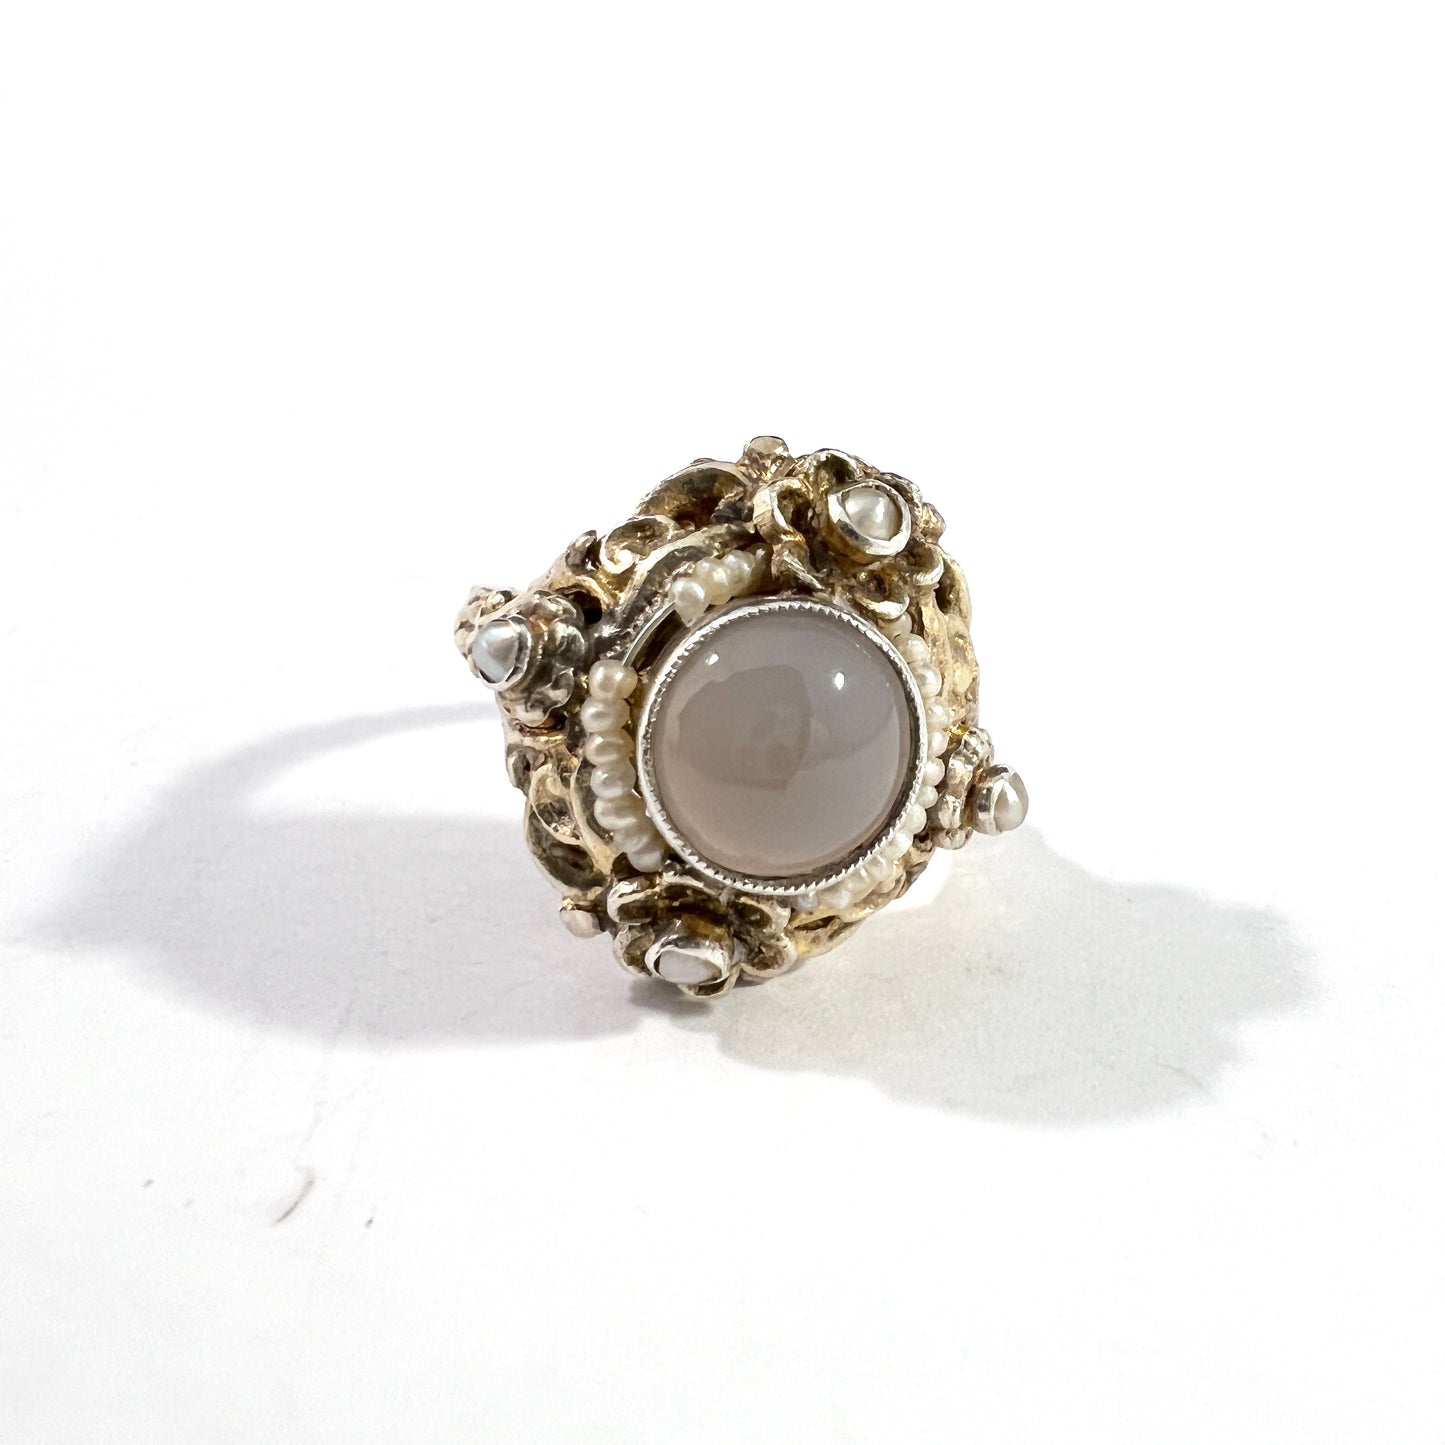 Austria / Hungary early 1900s. Solid Silver Chalcedony Pearl Ring